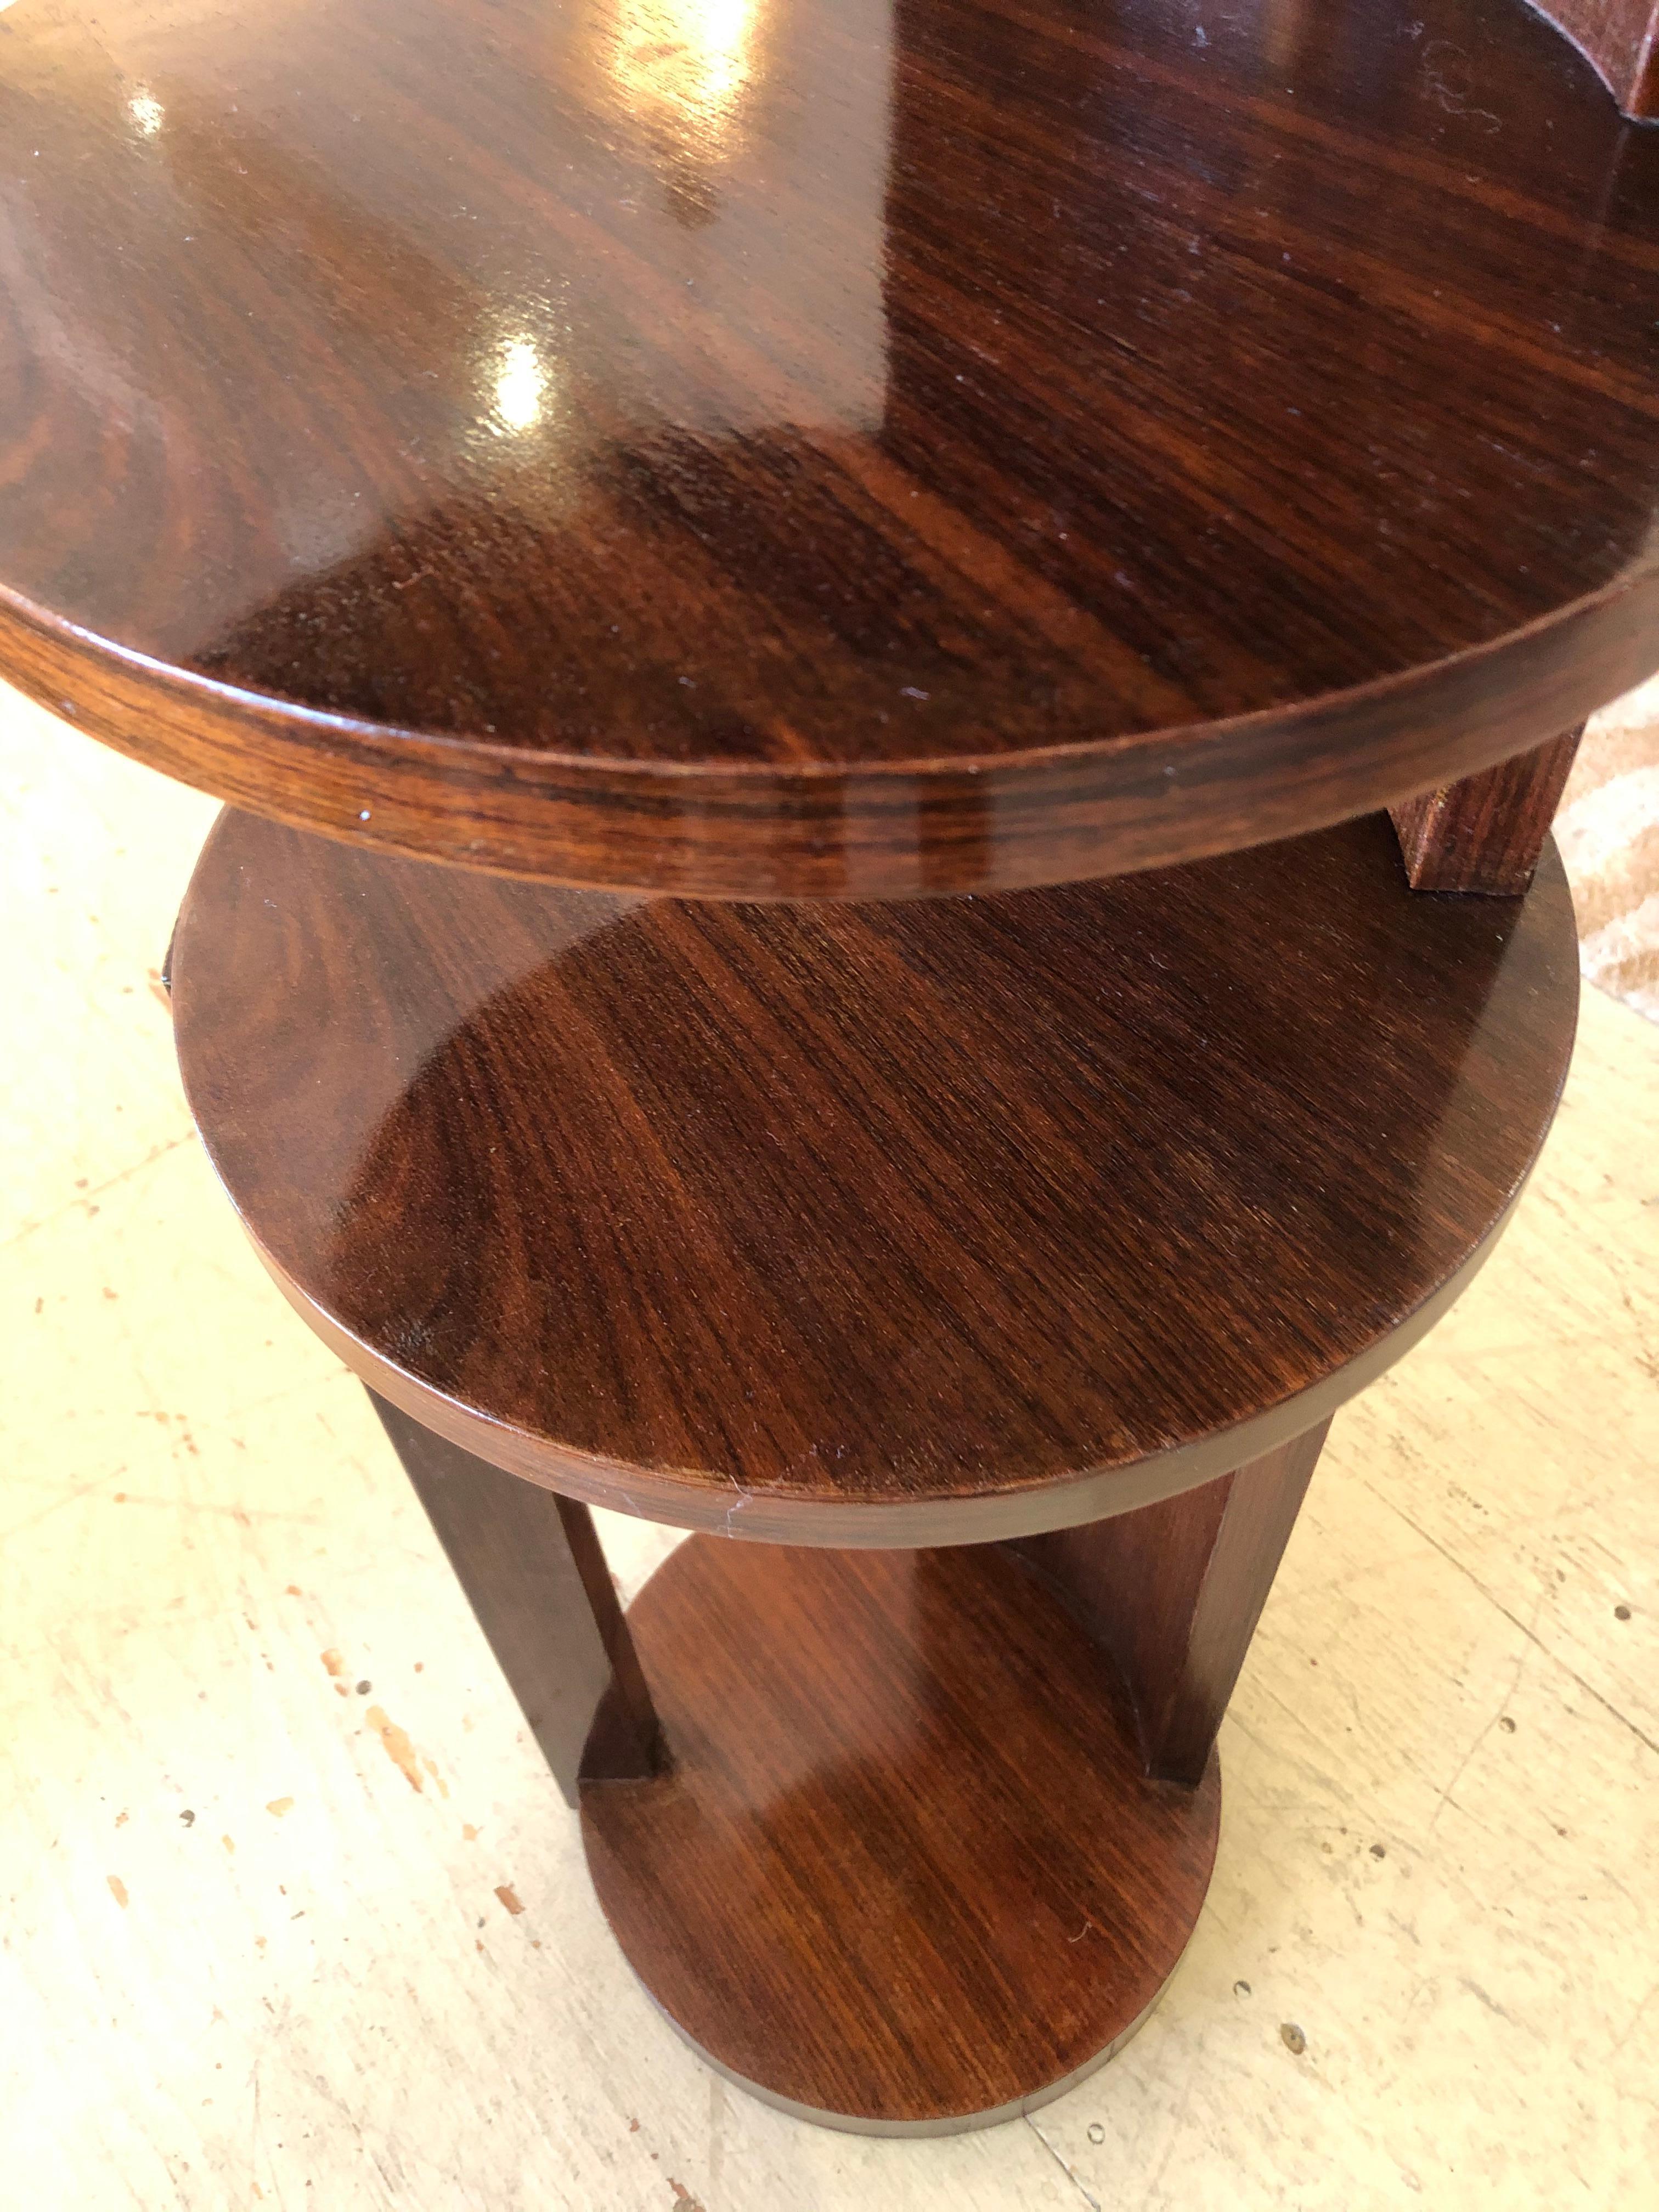 A very unusual chic round multi level étagère, stand or end table having stylish Art Deco lines, 4 tiers, and gorgeous richly grained dark rosewood veneer.
Distance between the levels, 23 H to bottom of first shelf, 5.75 between 2nd and 3rd, 5.5